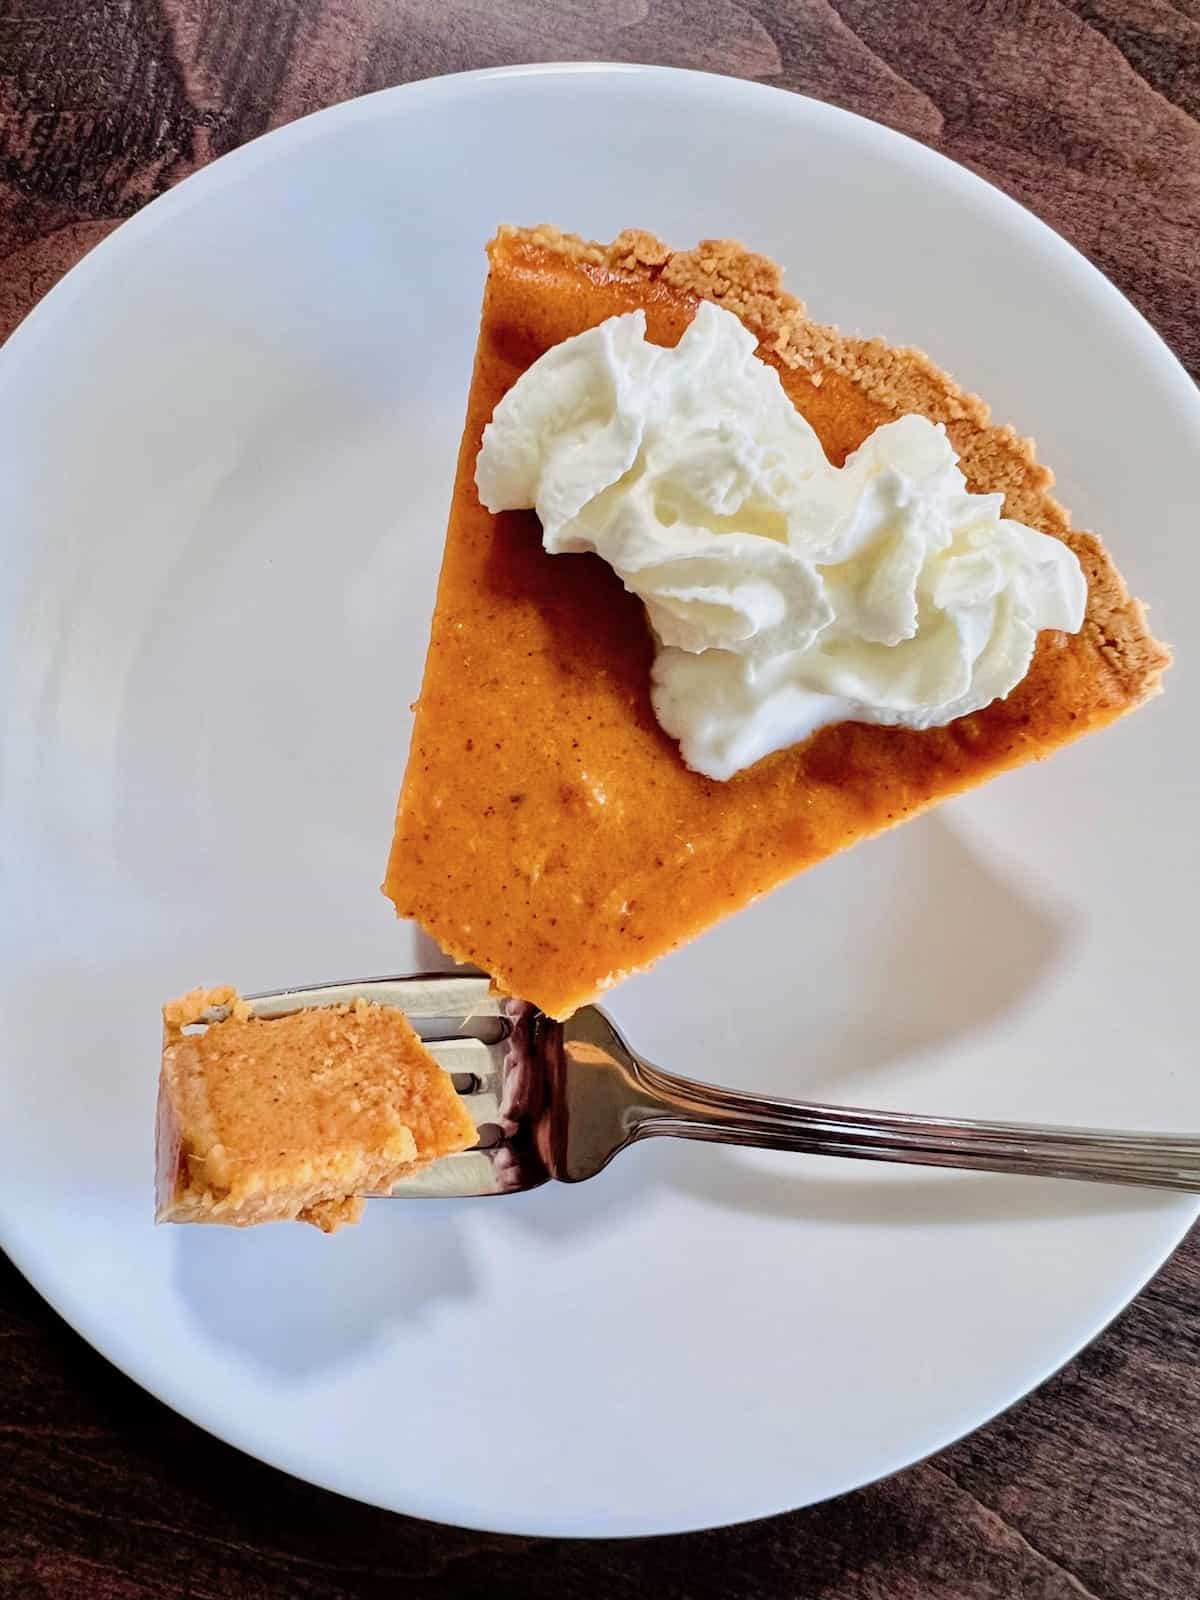 Graham Cracker Crust Sweet Potato Pie On a plate with a fork holding a bite.